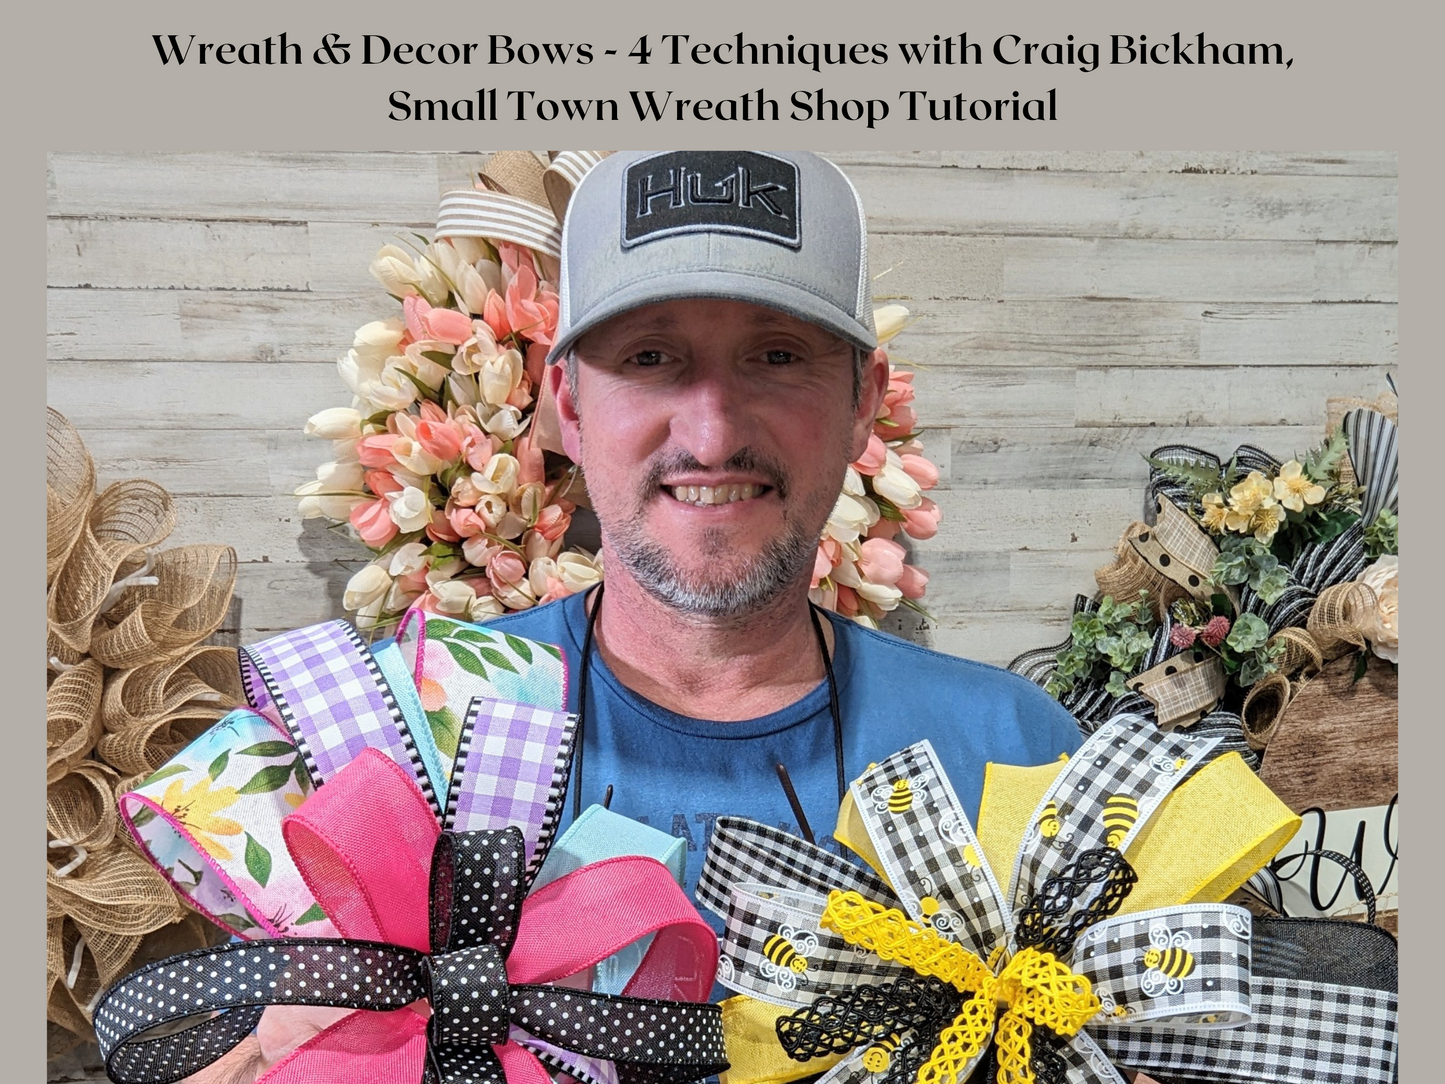 How to Create 4 Unique Bow Styles for Wreaths and Home Decor - Instant Video Tutorial (DIGITAL DOWNLOAD ONLY)